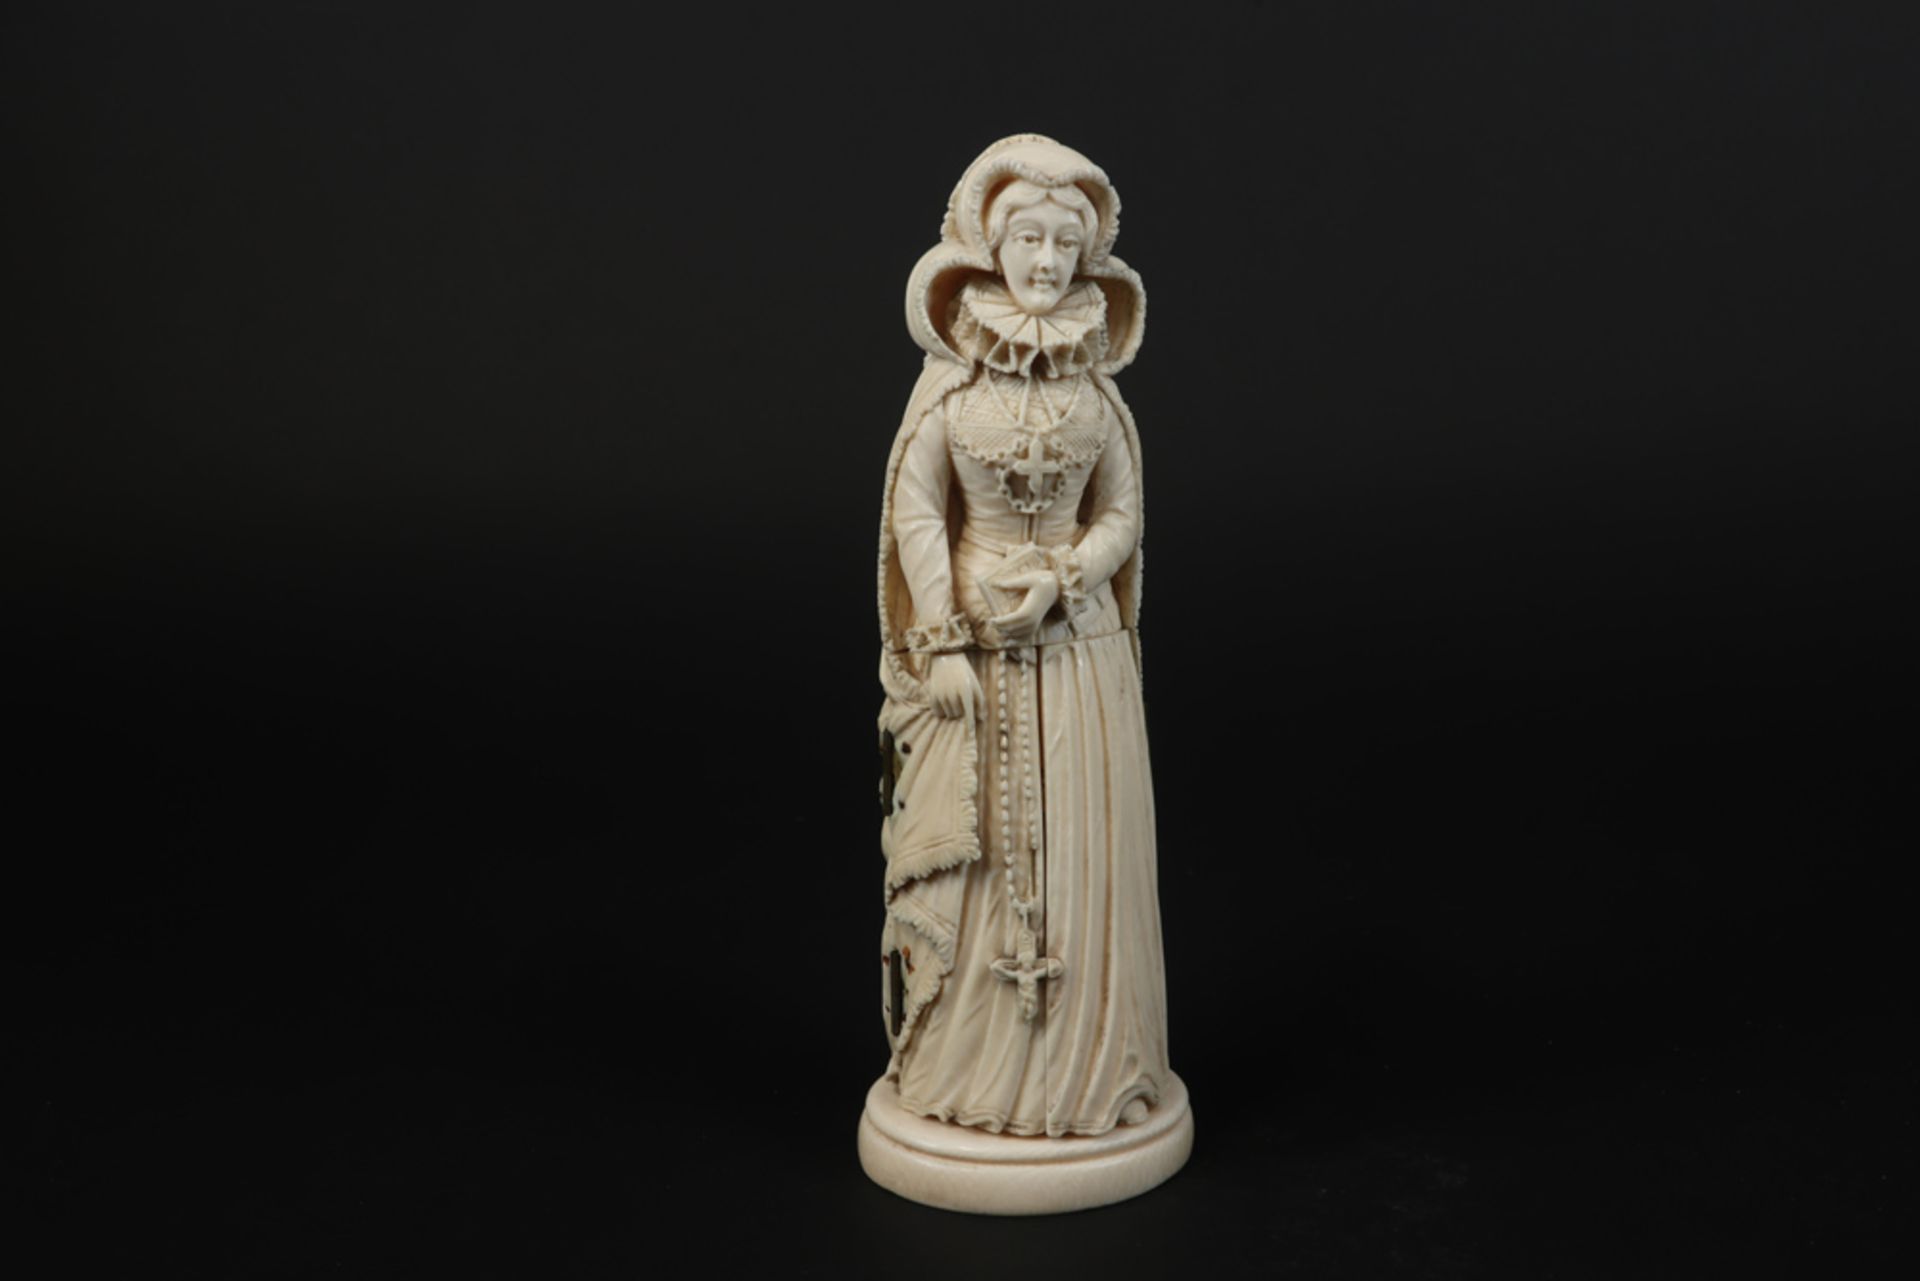 19th Cent European, presumably German, sculpture in ivory depicting Mary Stuart (queen of Scots) ,